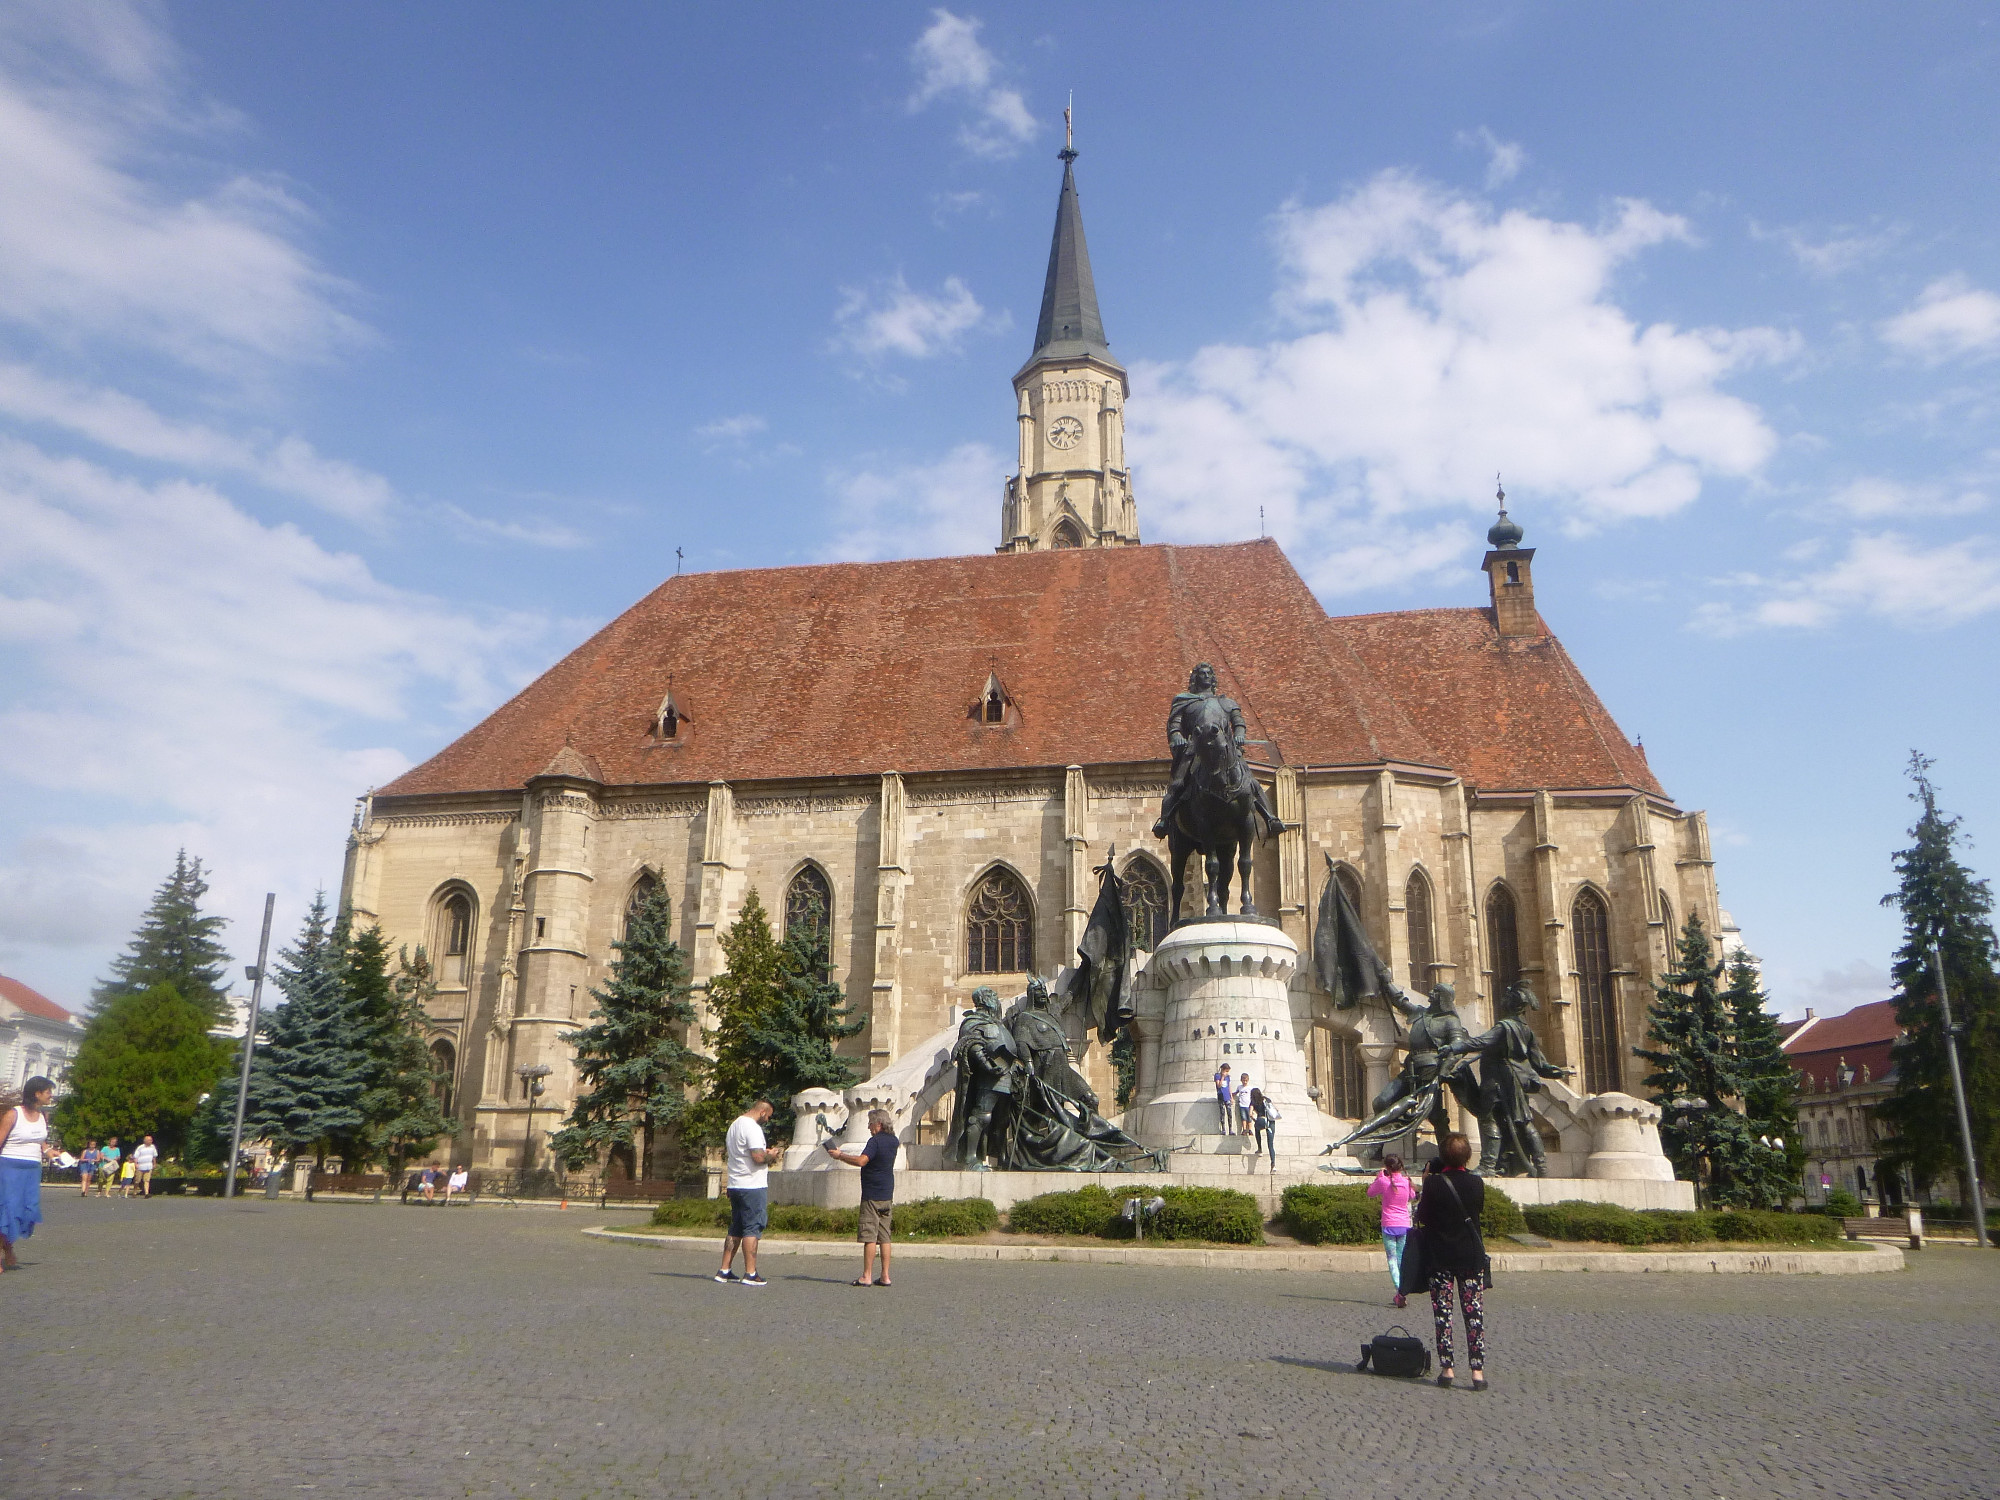 Gothic-style St. Michael's Church and the dramatic Matthias Corvinus Statue of the 15th-century king. 